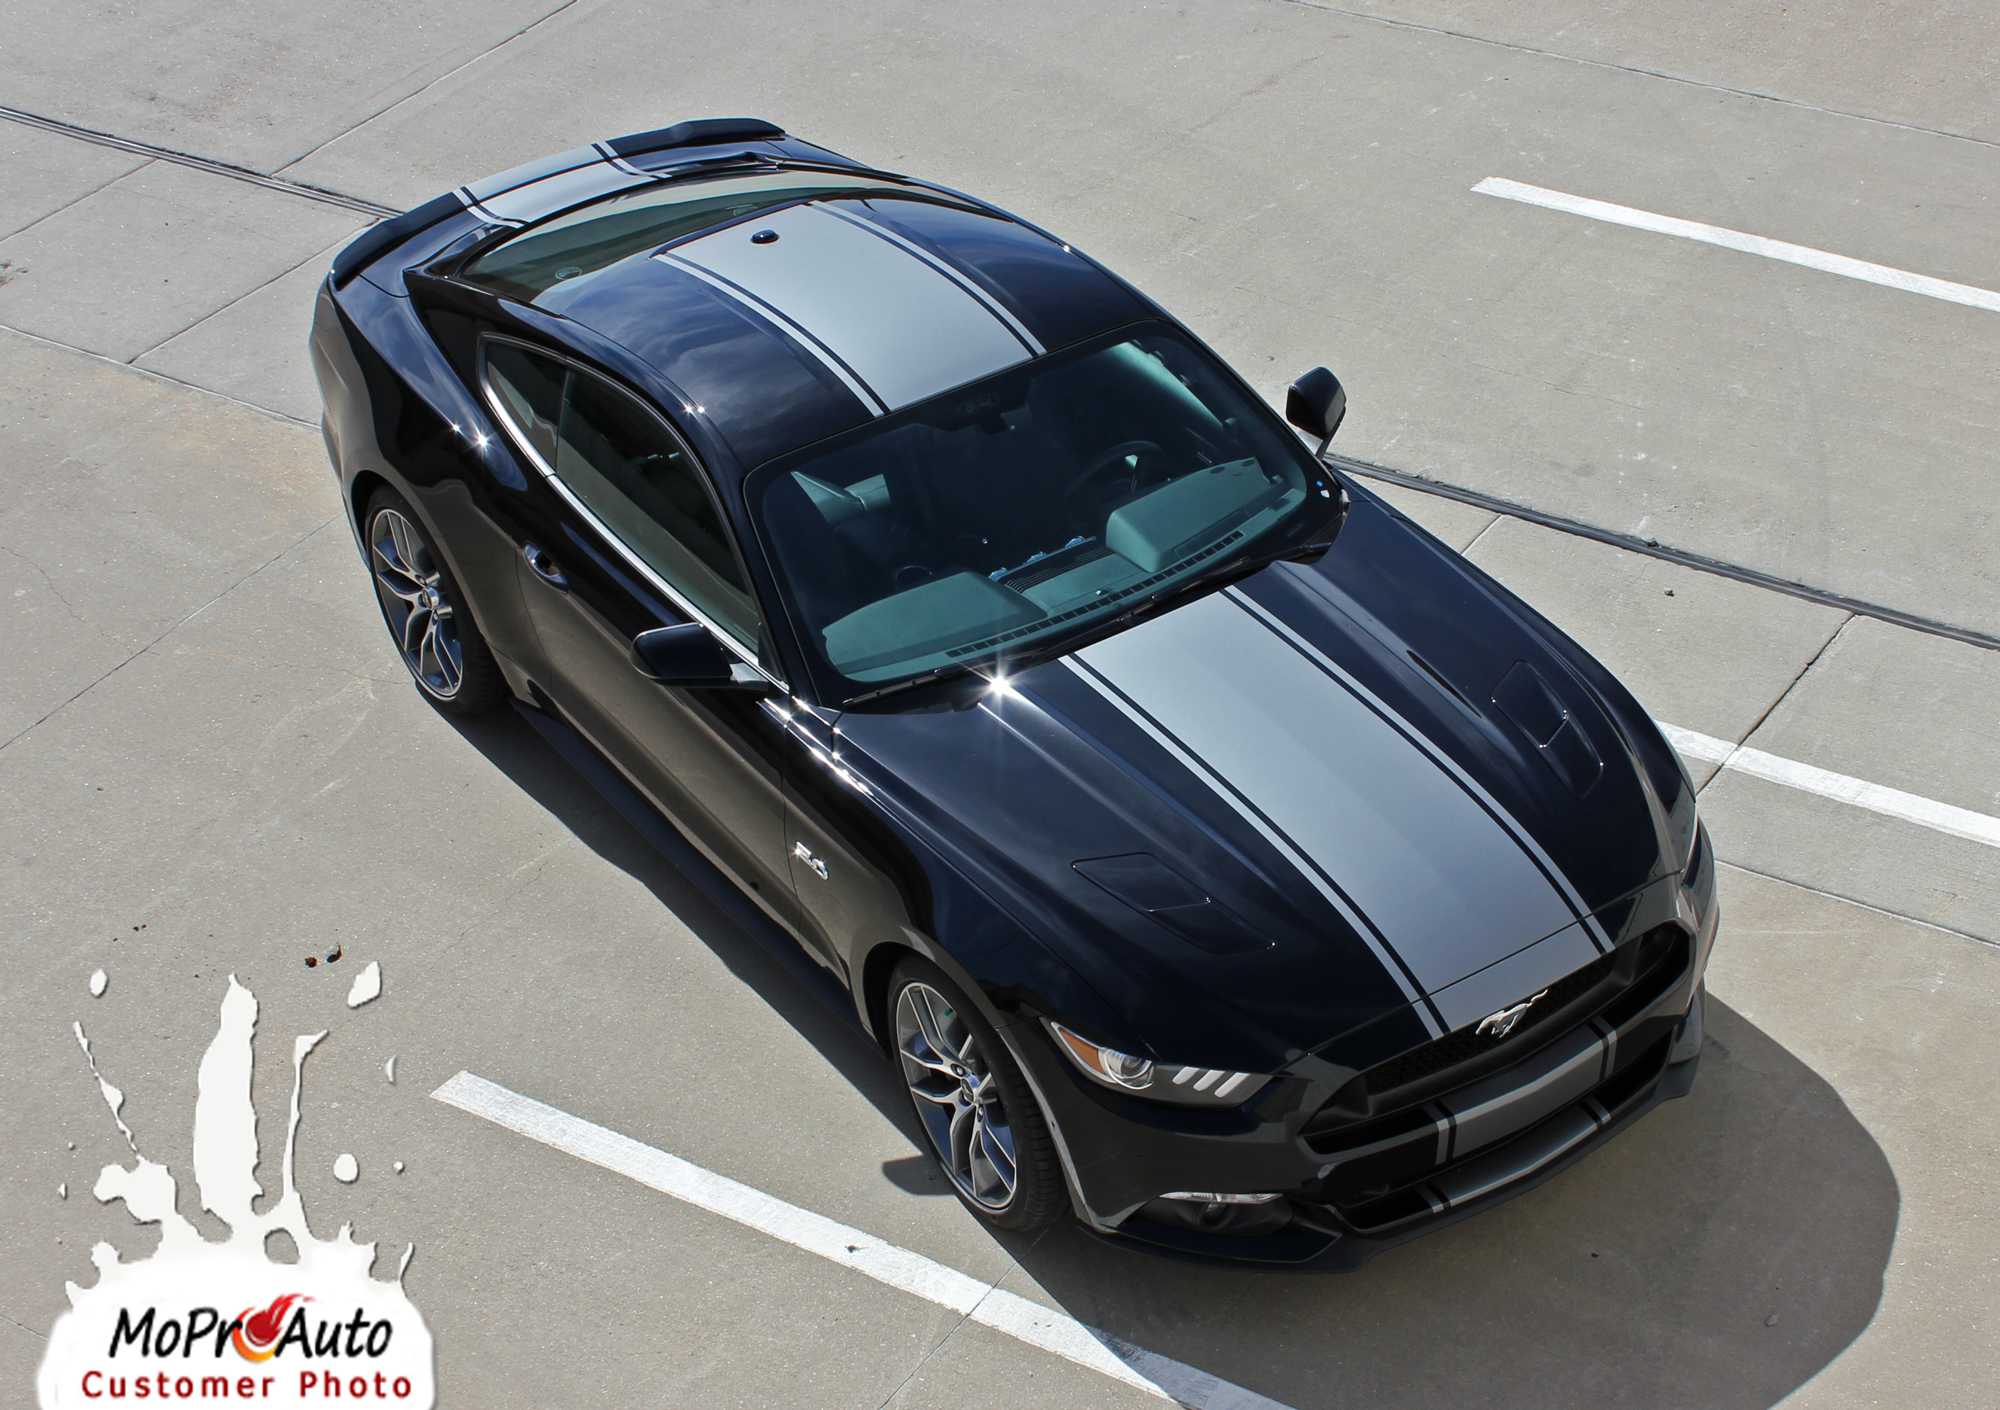 2015 2016 2017 Contender Bumper tp Bumper Hood Roof Trunk Racing Stripes for Ford Mustang - MoProAuto Pro Design Series Vinyl Graphics, Stripes and Decals Kit